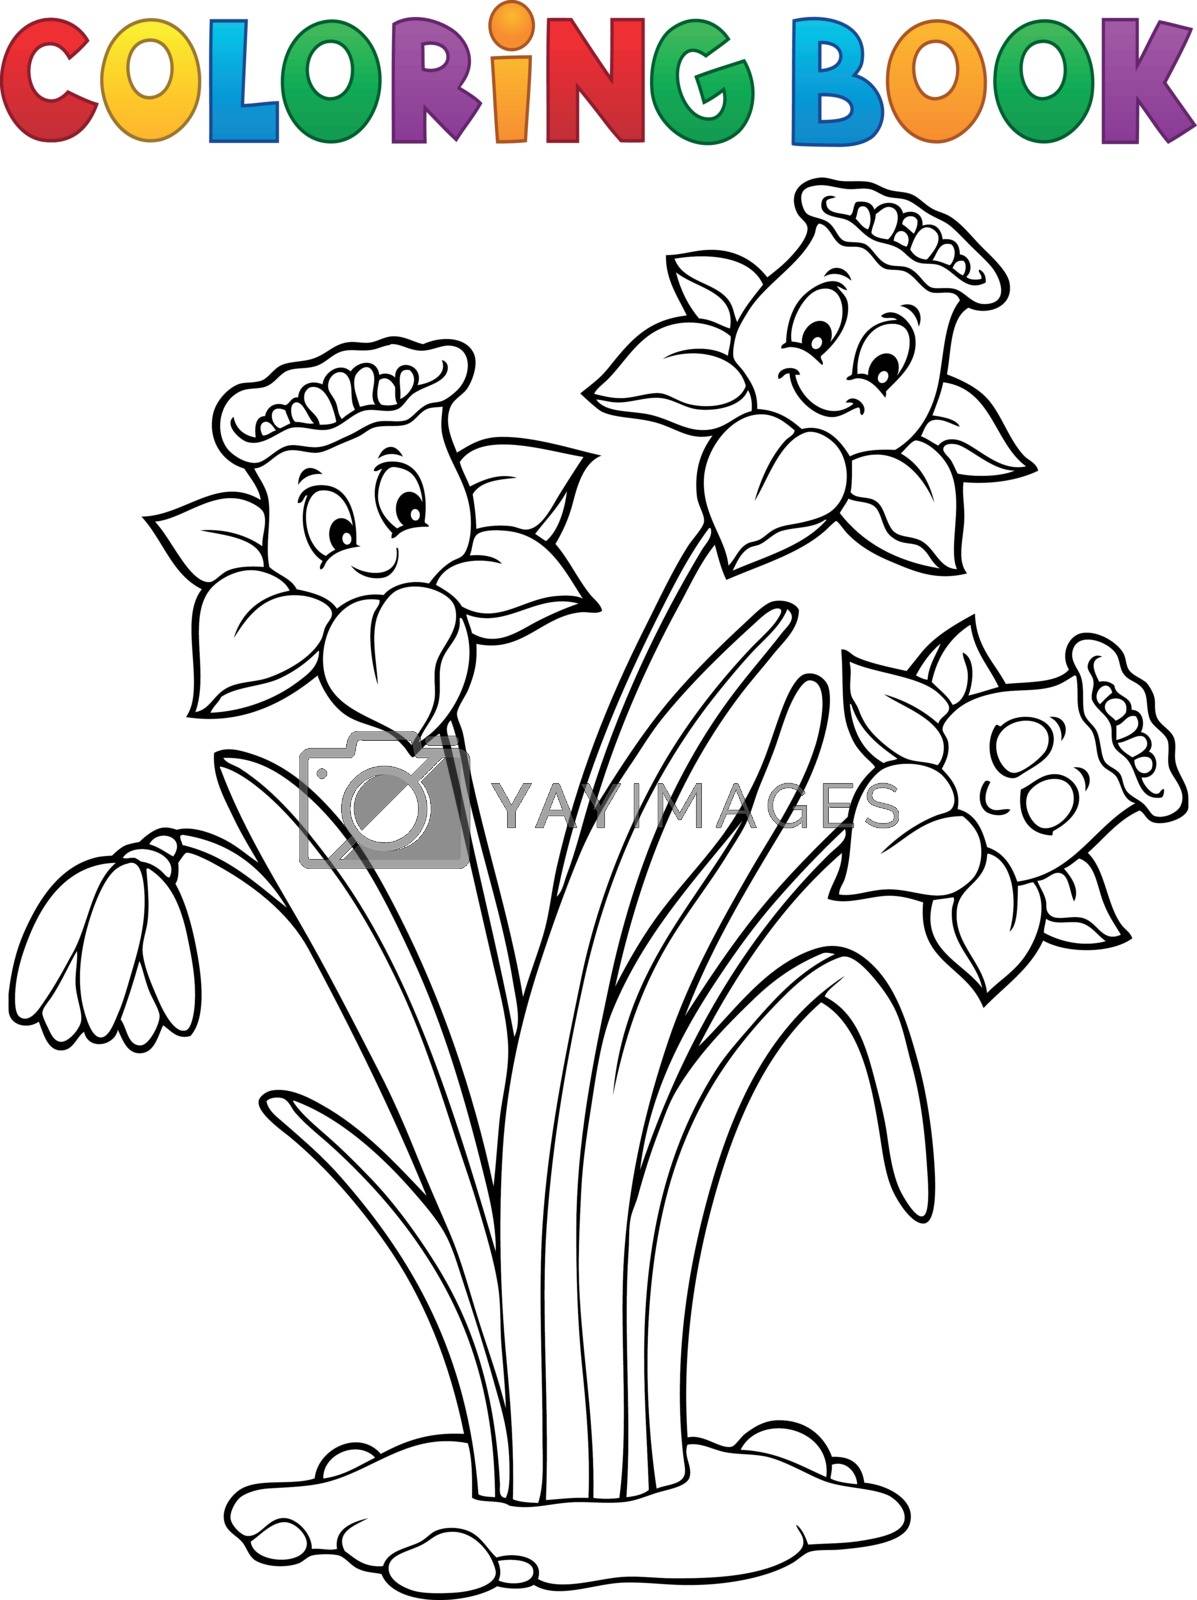 Royalty free image of Coloring book narcissus flower image 1 by clairev